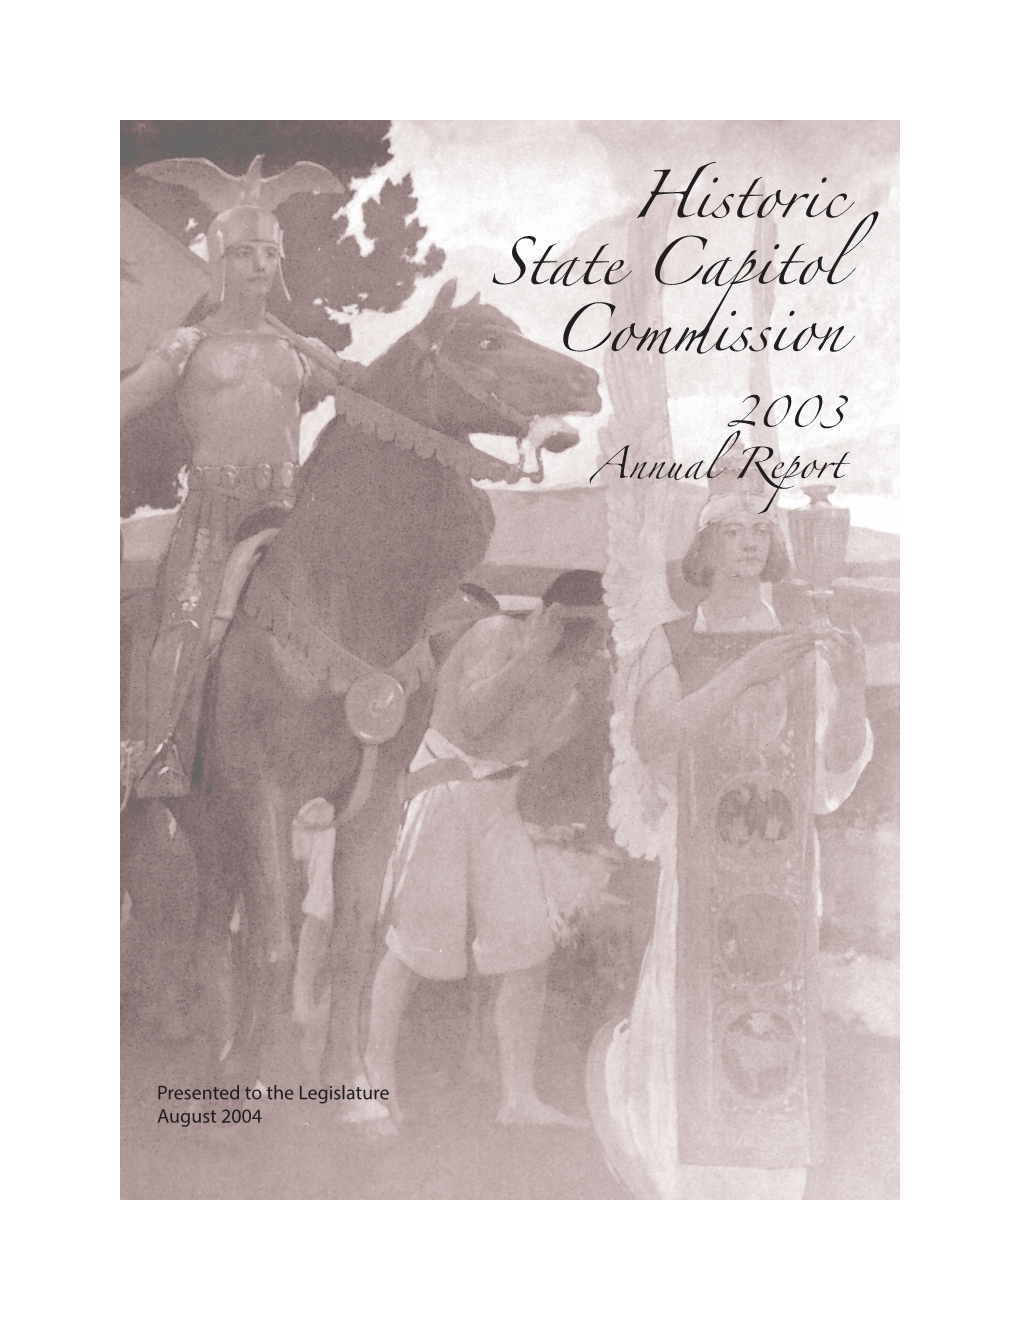 Historic State Capitol Commission 2003 Annual Report